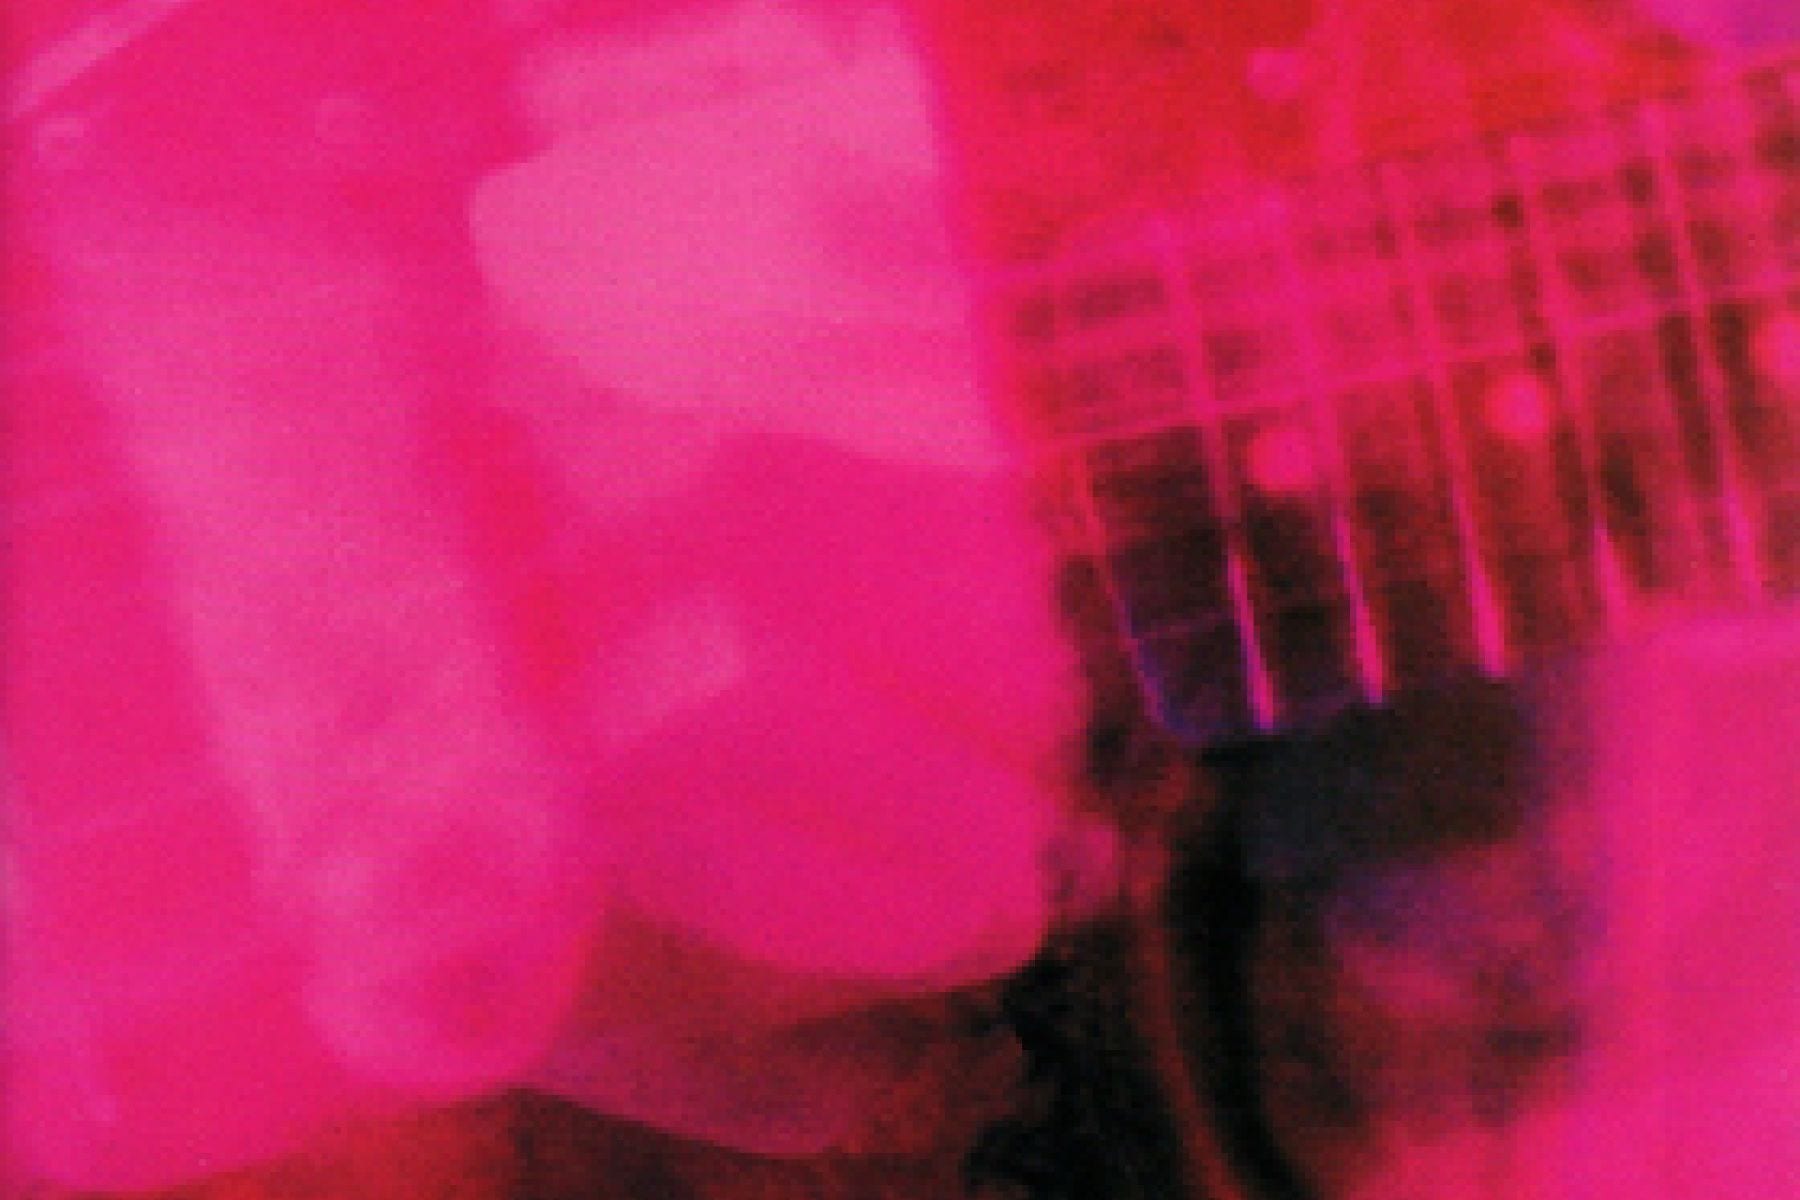 My Bloody Valentine’s ‘Loveless’ and the Un-Invention of Cock Rock